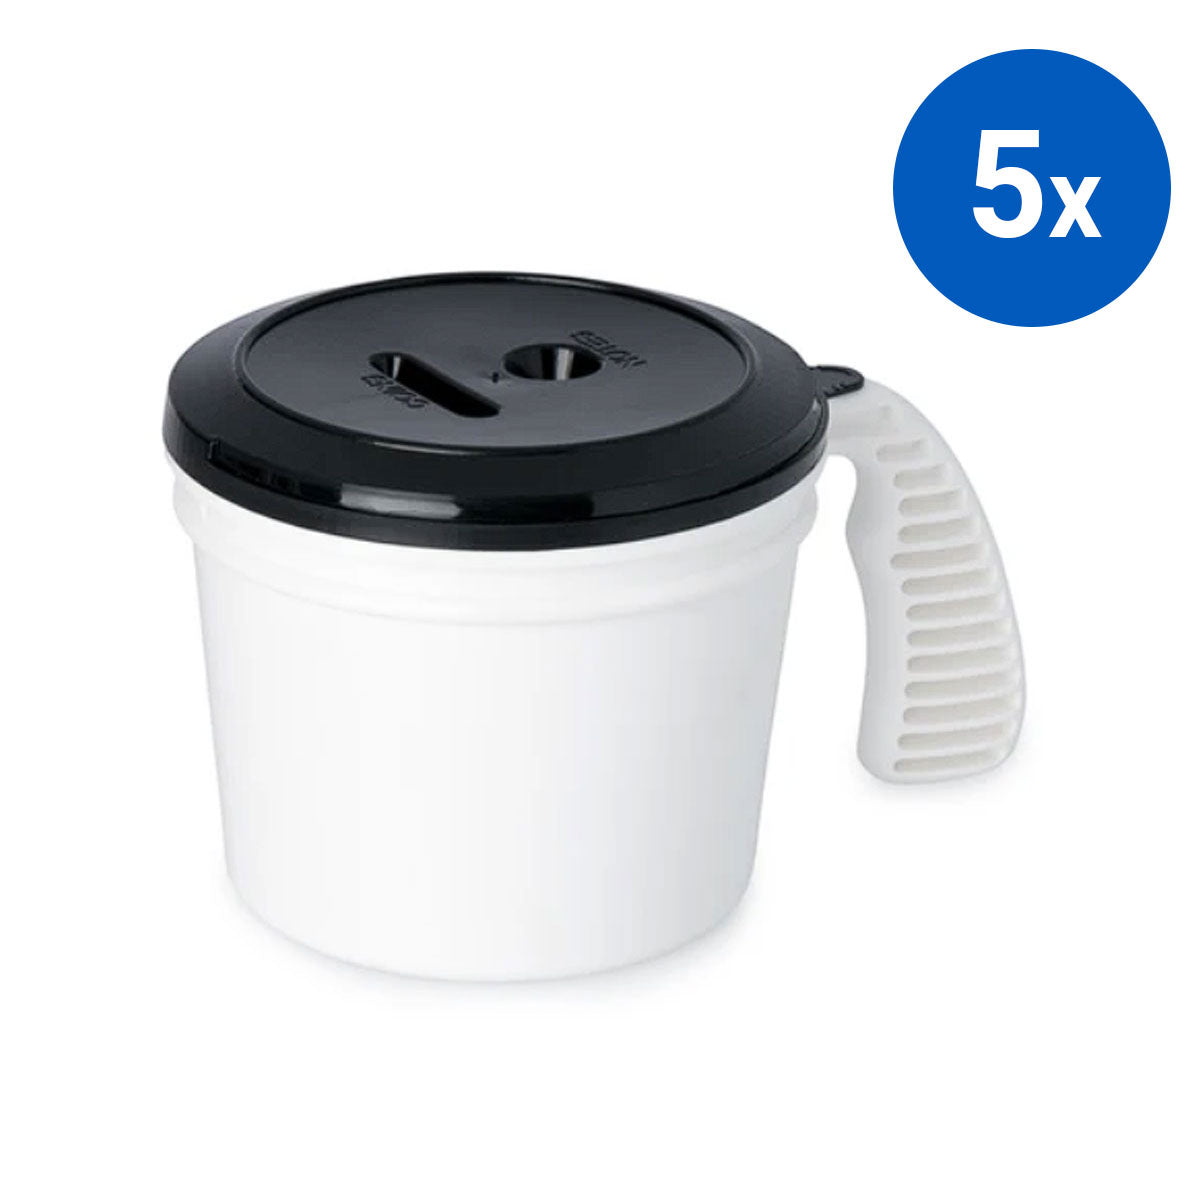 5x Collection Container Base and Standard Lid - Black